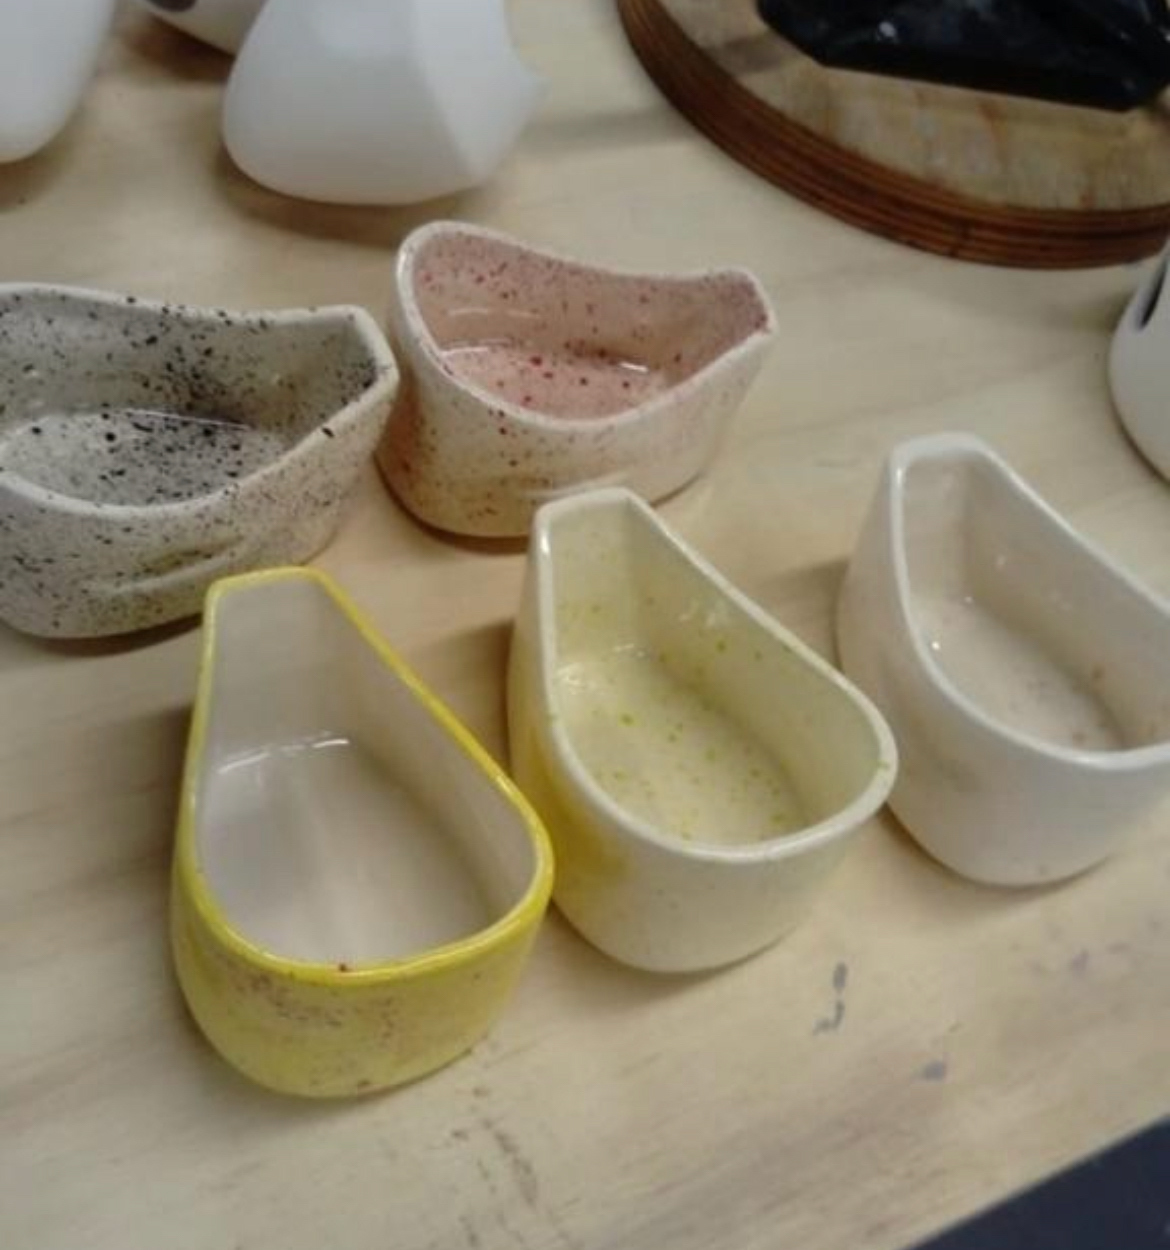 industrialdesign mexicandesign Pottery productdesign